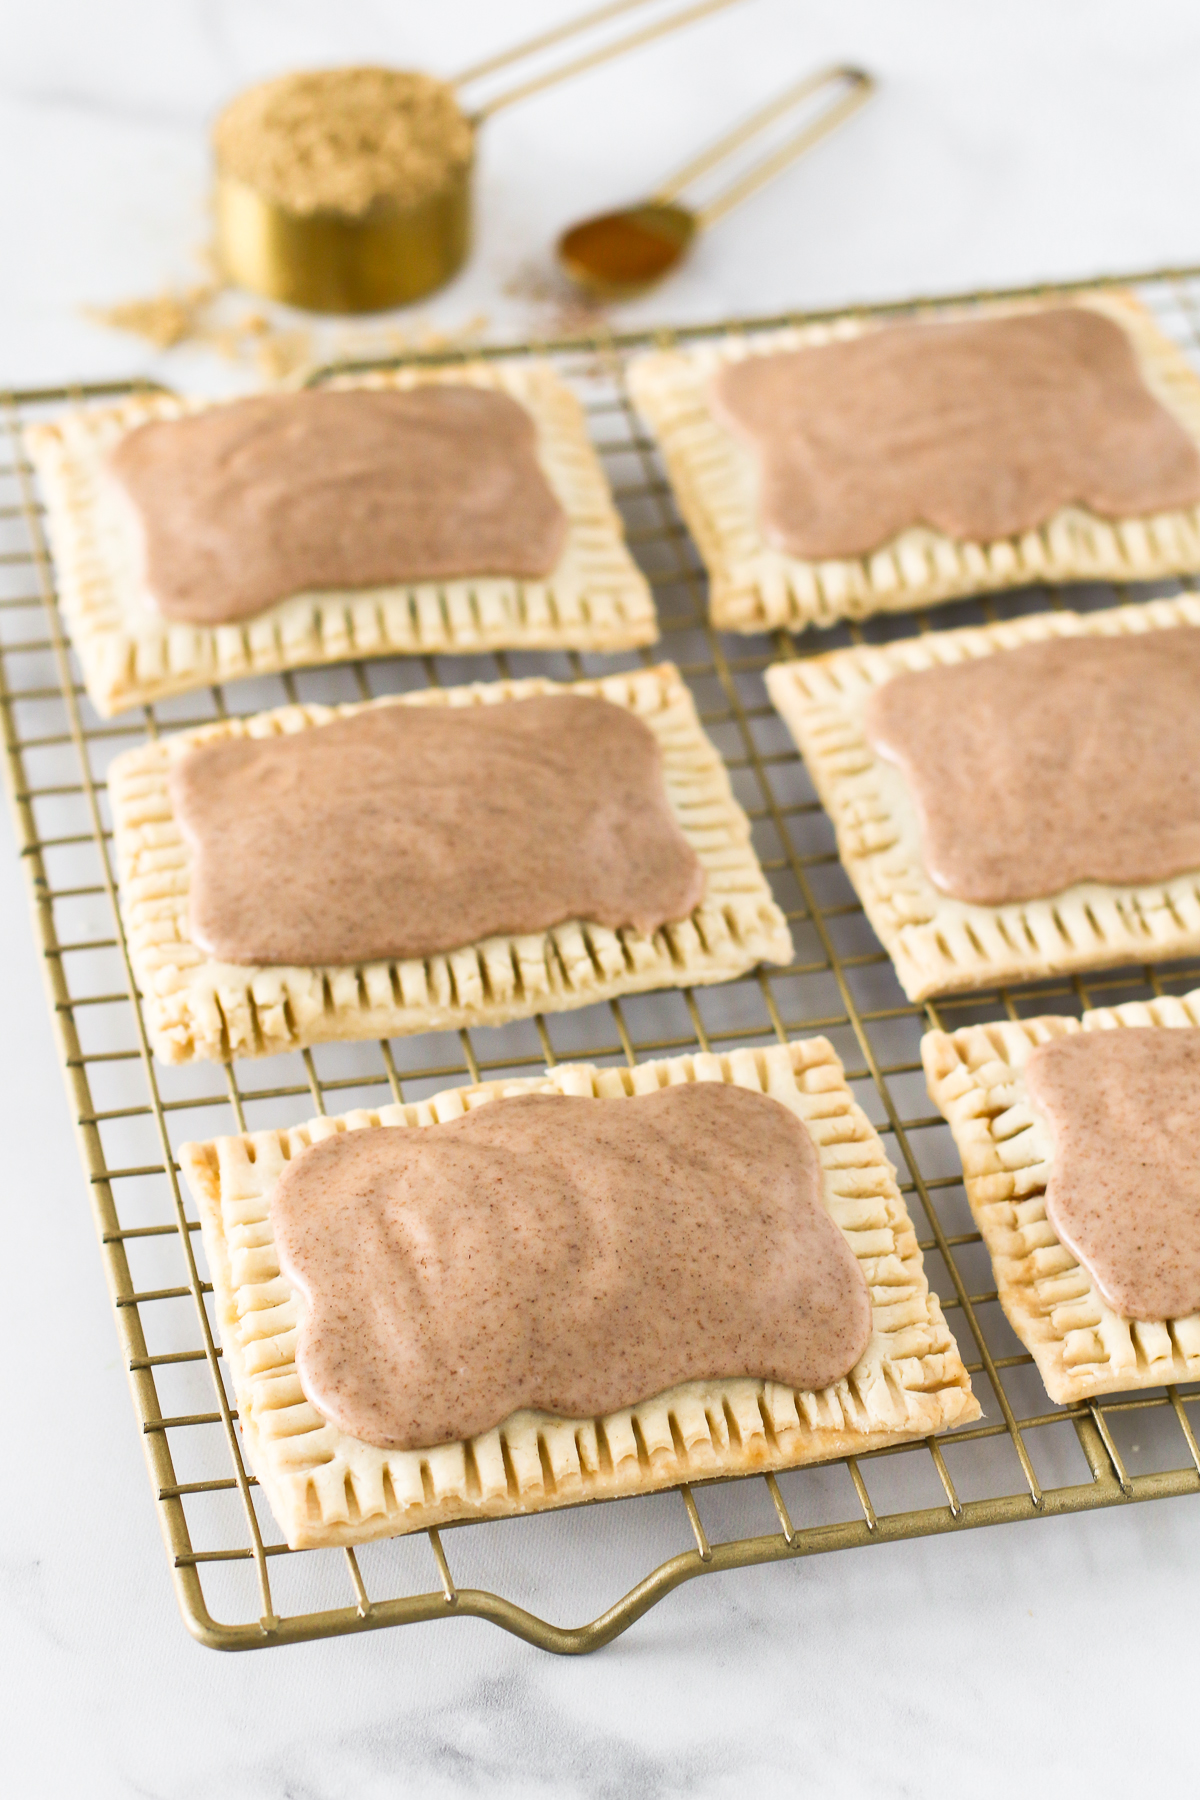 Gluten Free Vegan Brown Sugar Cinnamon Pop Tarts. Homemade buttery pastry, with a cinnamon sugar filling and covered in a sweet cinnamon glaze. 